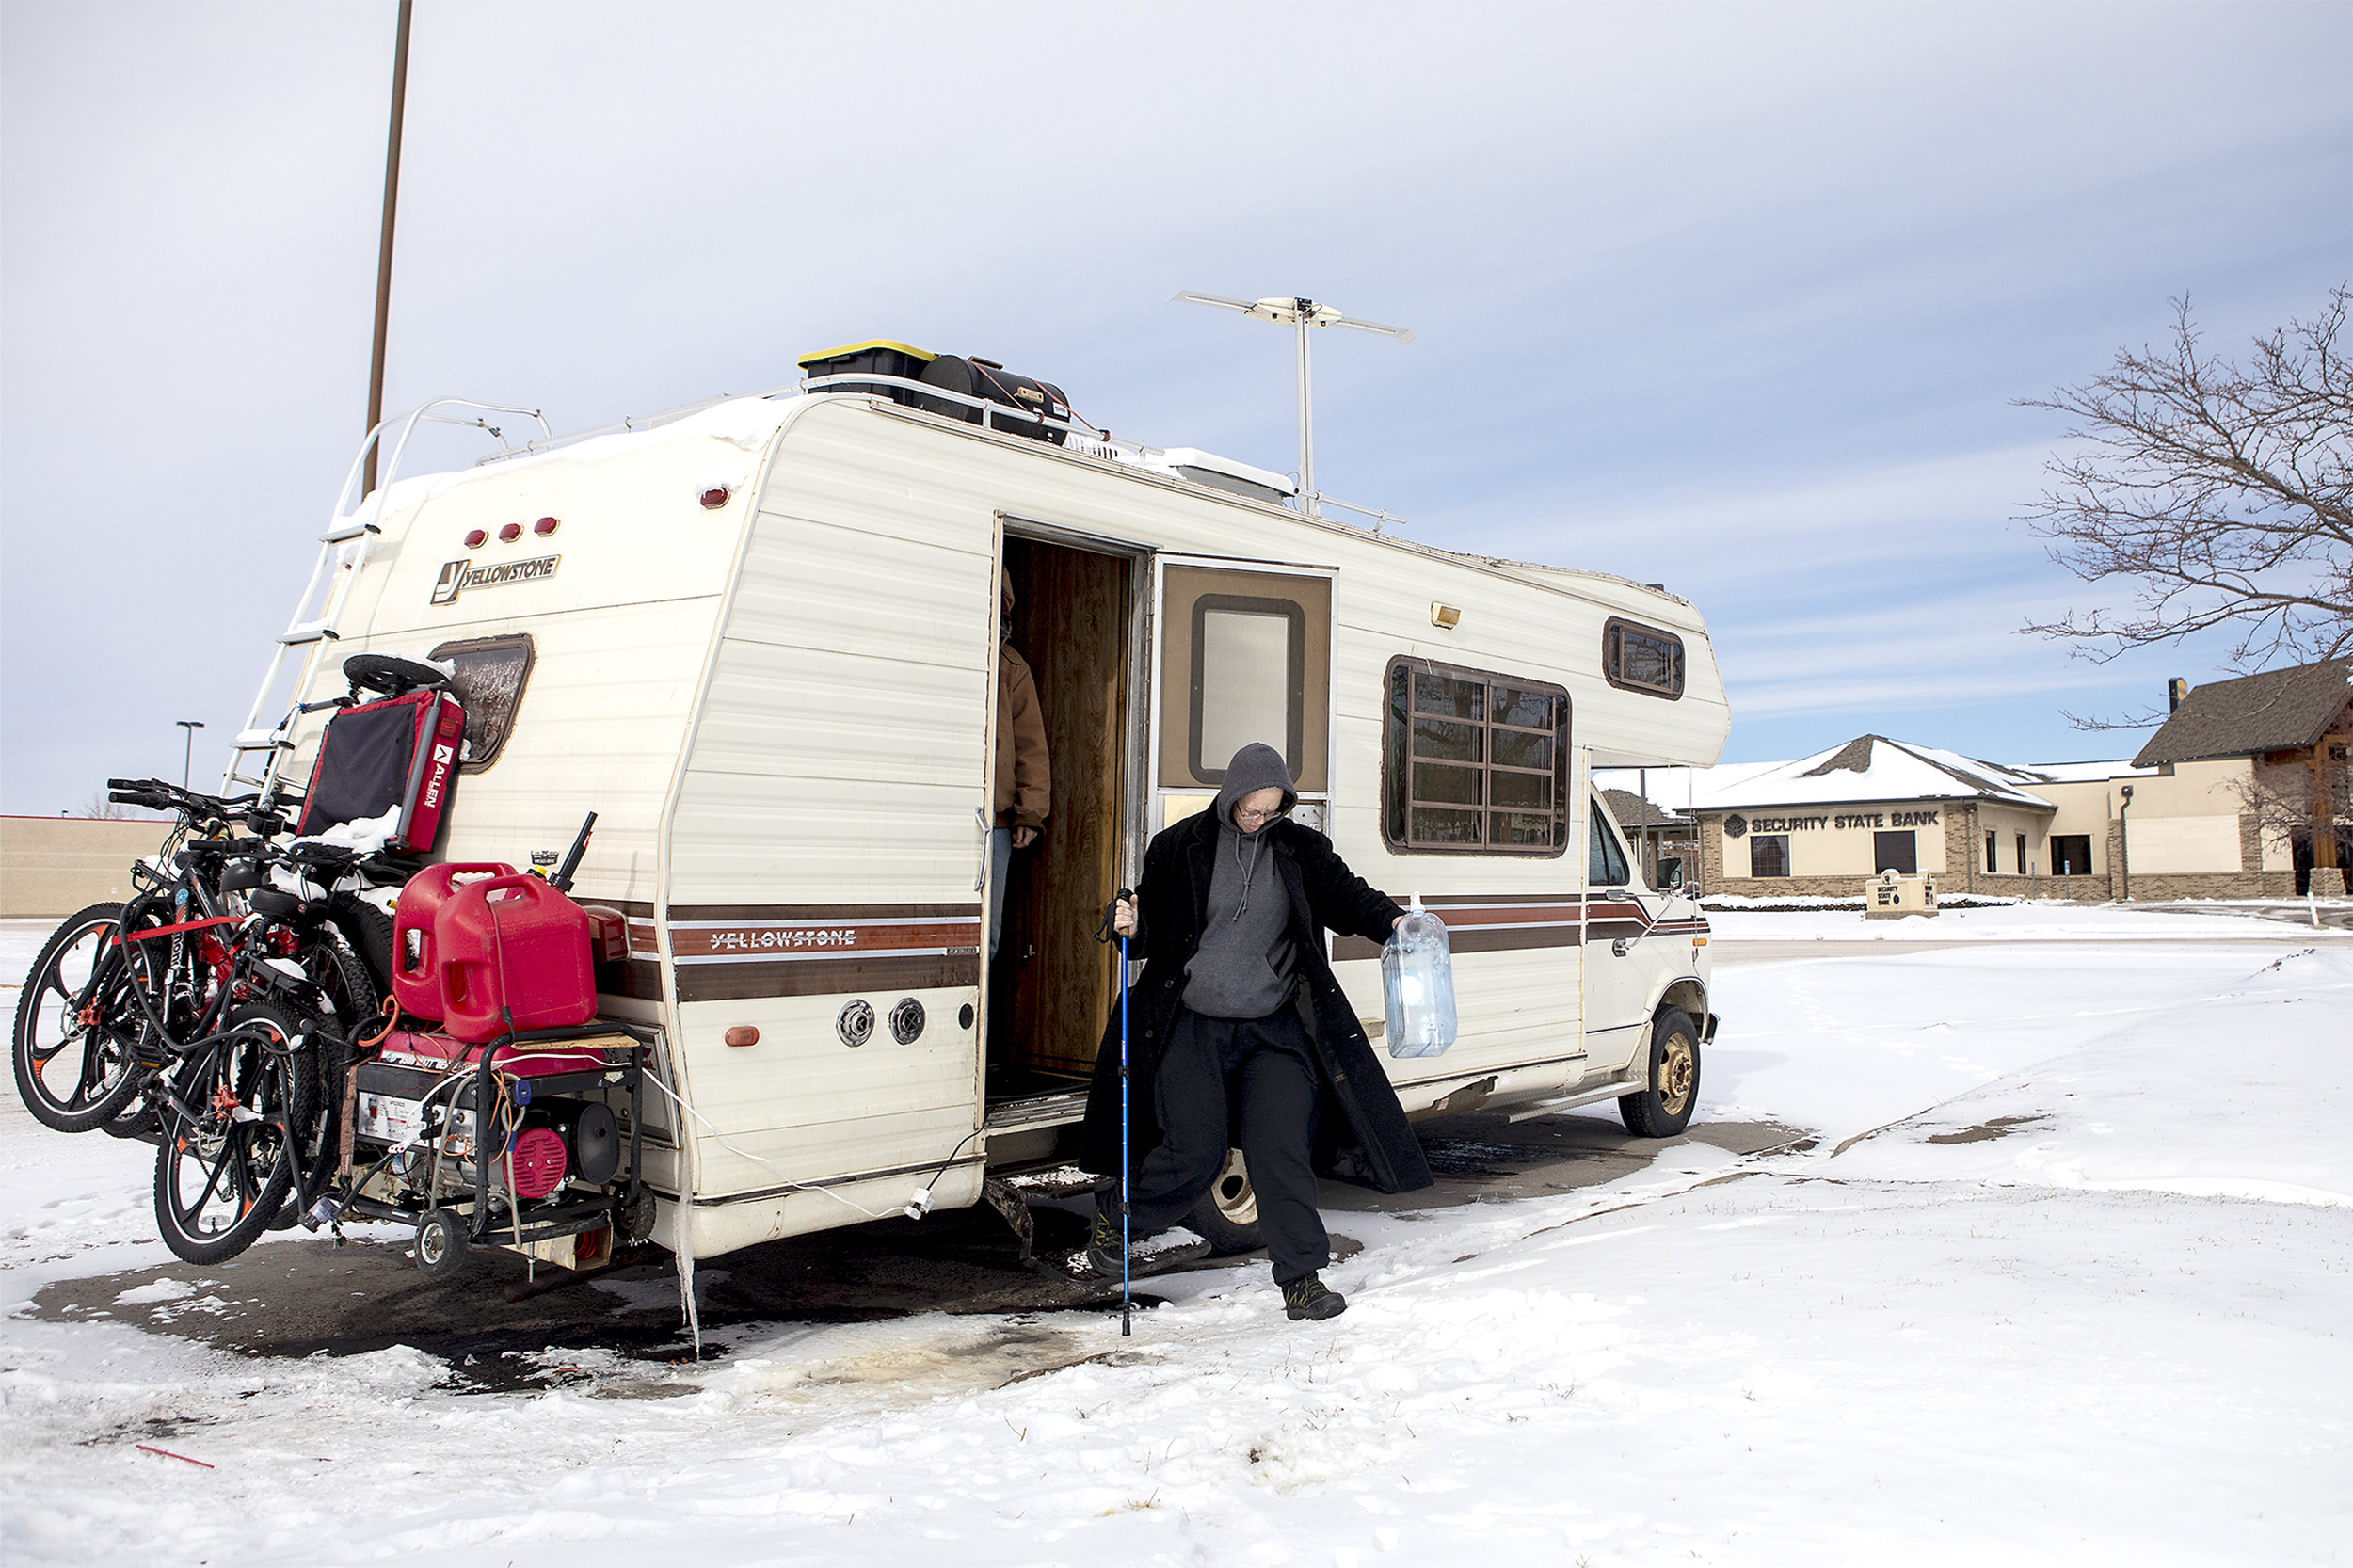  Andrea and Jeff exit their mobile home for a trip to Flying J's to get water. The family hopes to be able to travel from place to place after their home is repaired. 